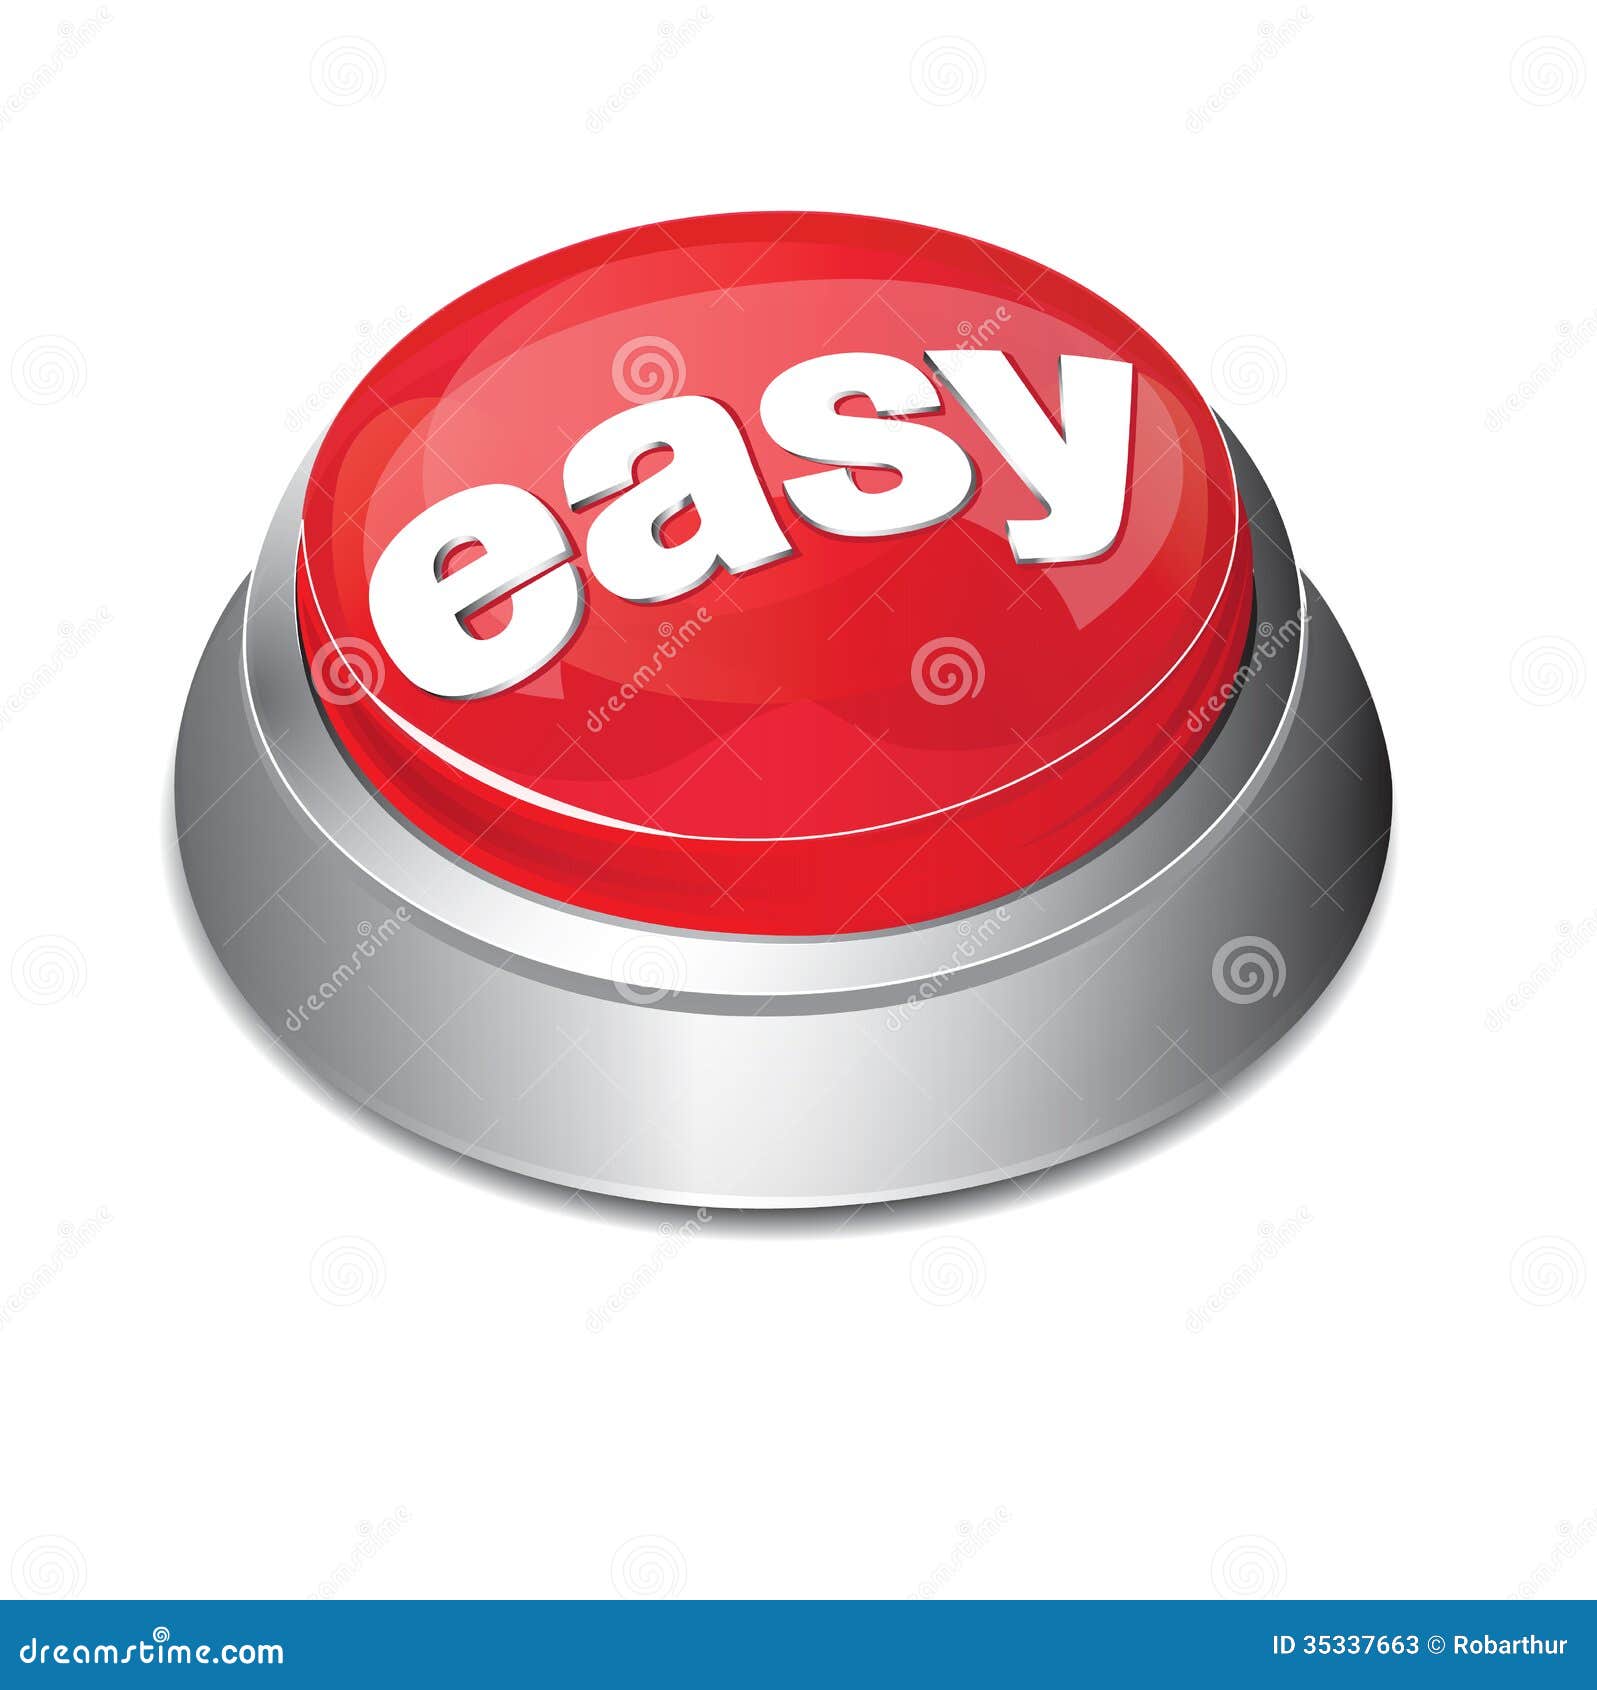 Press the Easy Button stock vector. Illustration of assistance - 35337663